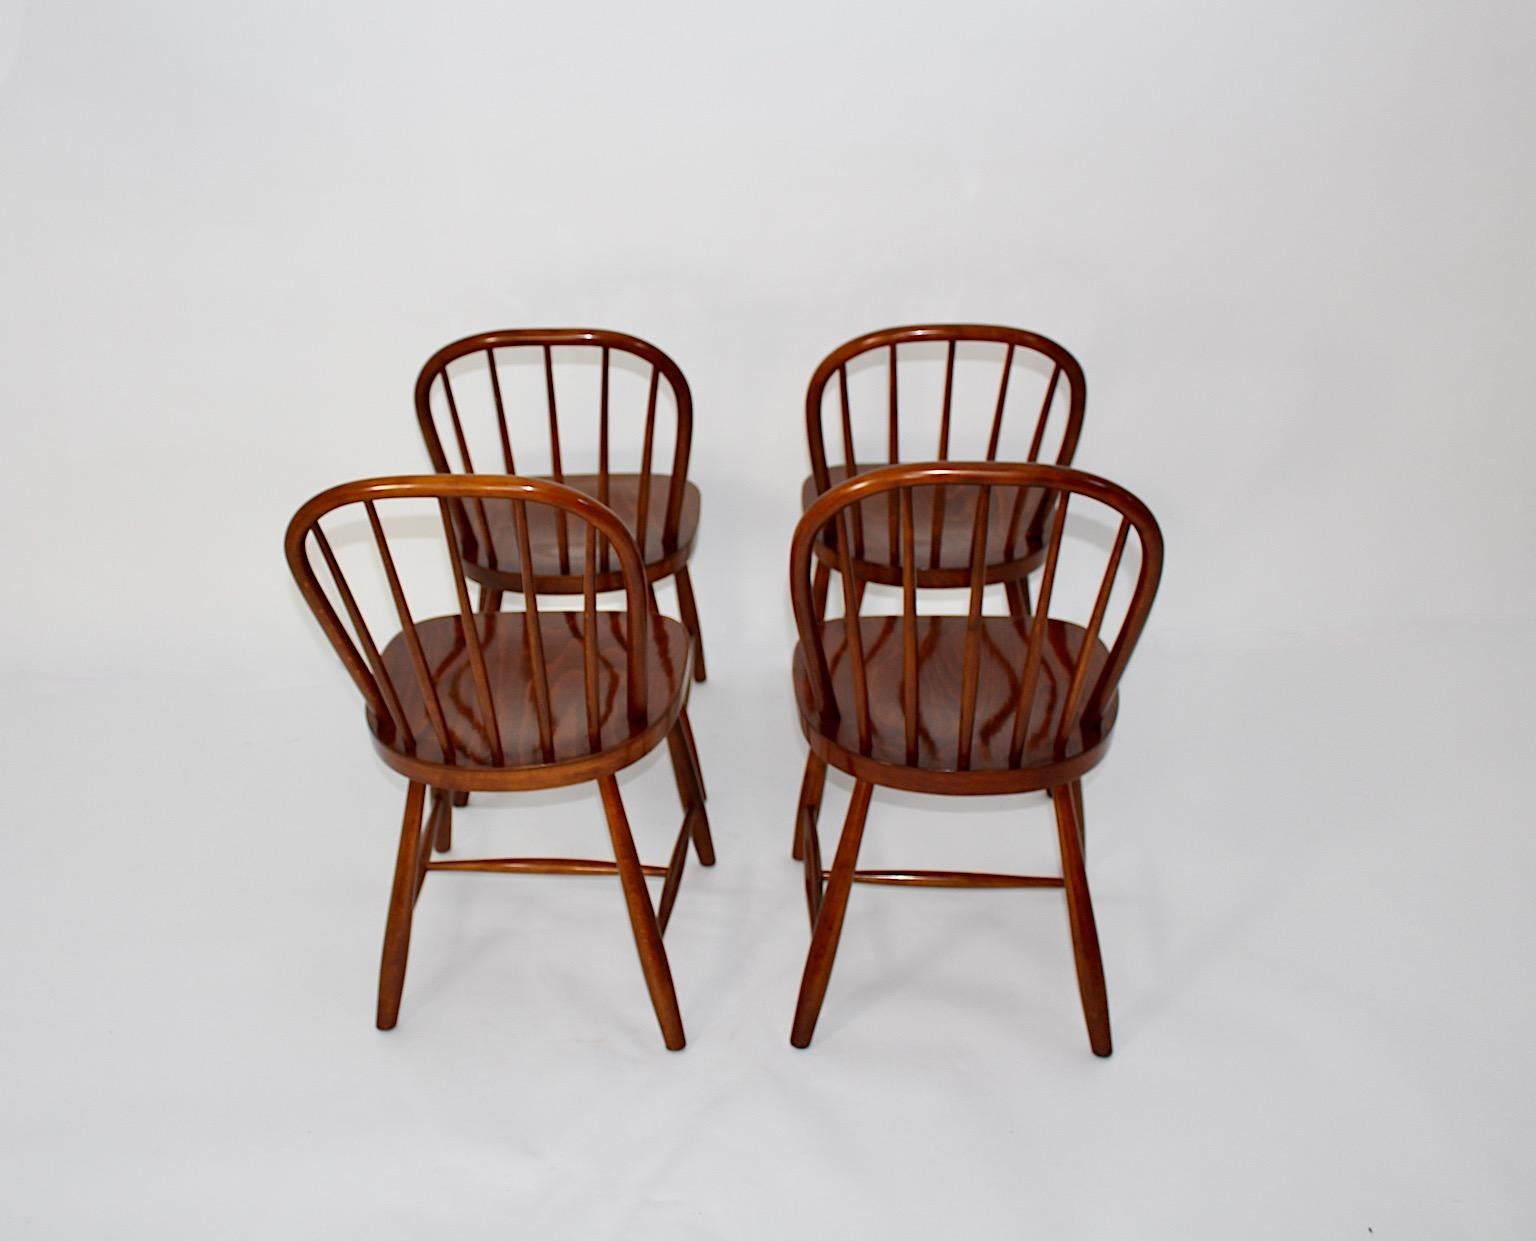 Art Deco Vintage Beech Windsor Dining Room Chairs Four Josef Frank 1920s Vienna For Sale 8